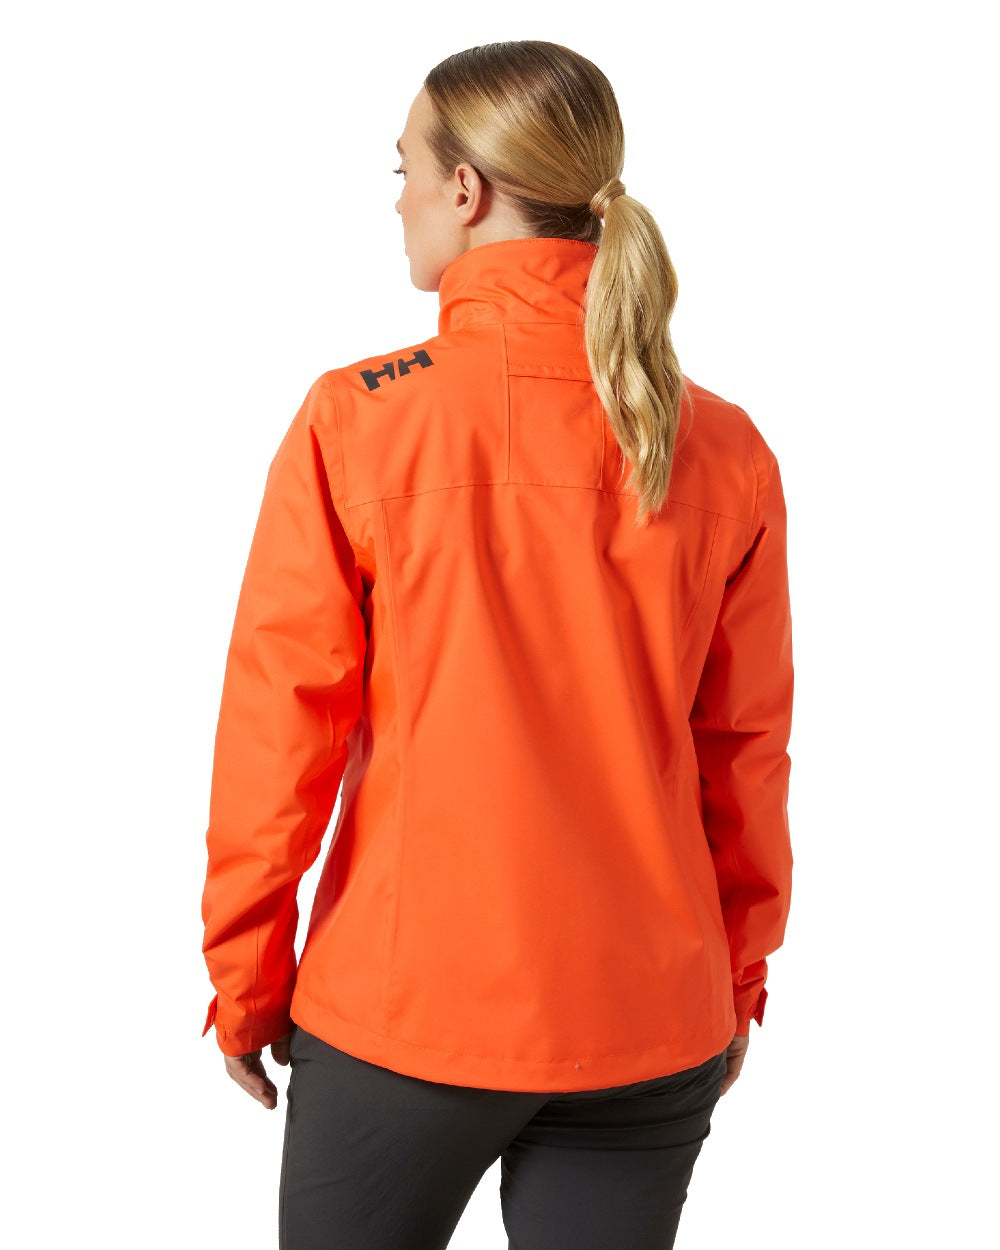 Flame coloured Helly Hansen Womens Crew Midlayer Sailing Jacket 2.0 on white background 